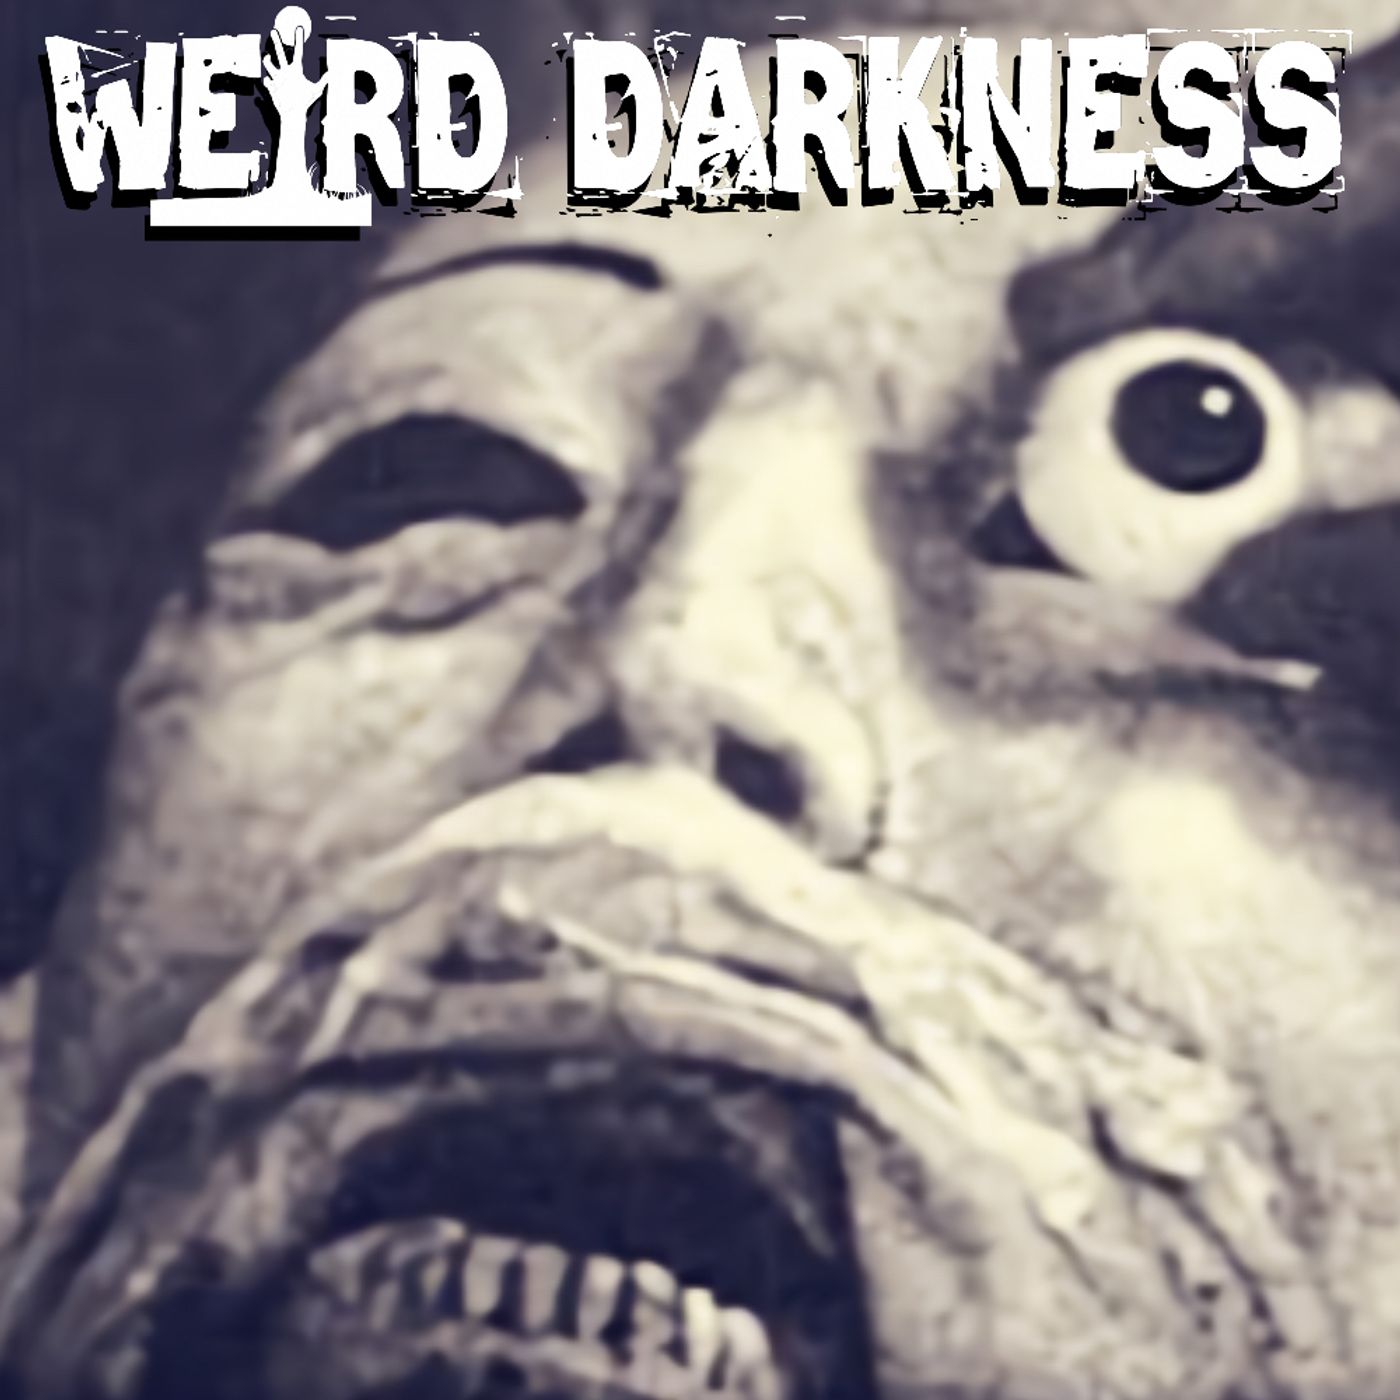 “THE MORBID OBSESSION OF CARL VAN COSEL” and More Strange True Stories! #WeirdDarkness #Darkives